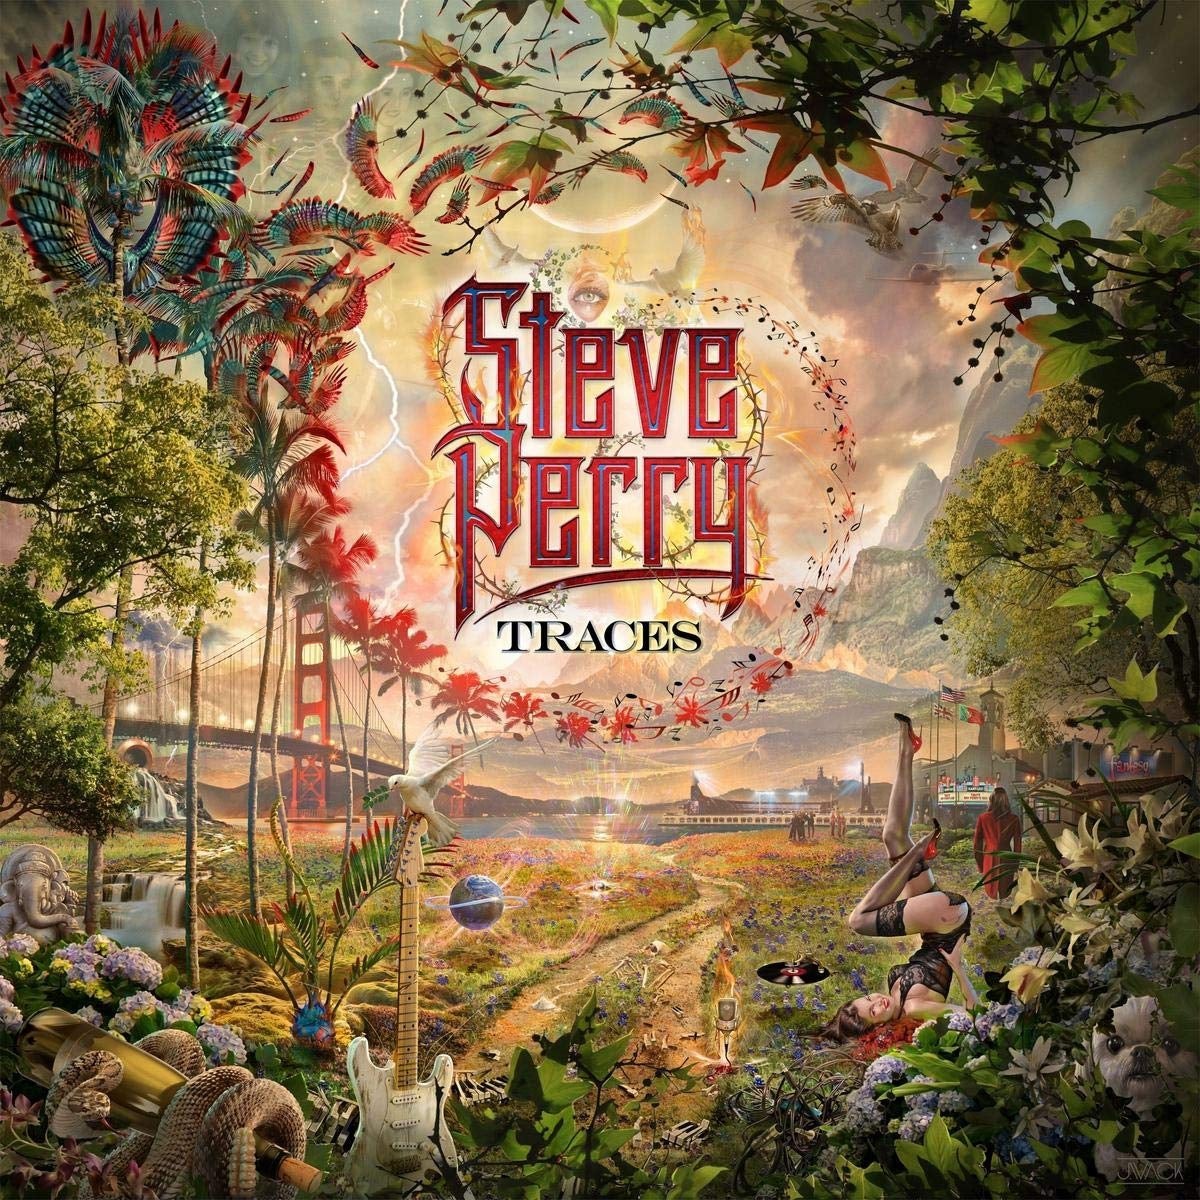 Steve Perry | Traces [Deluxe] | CD